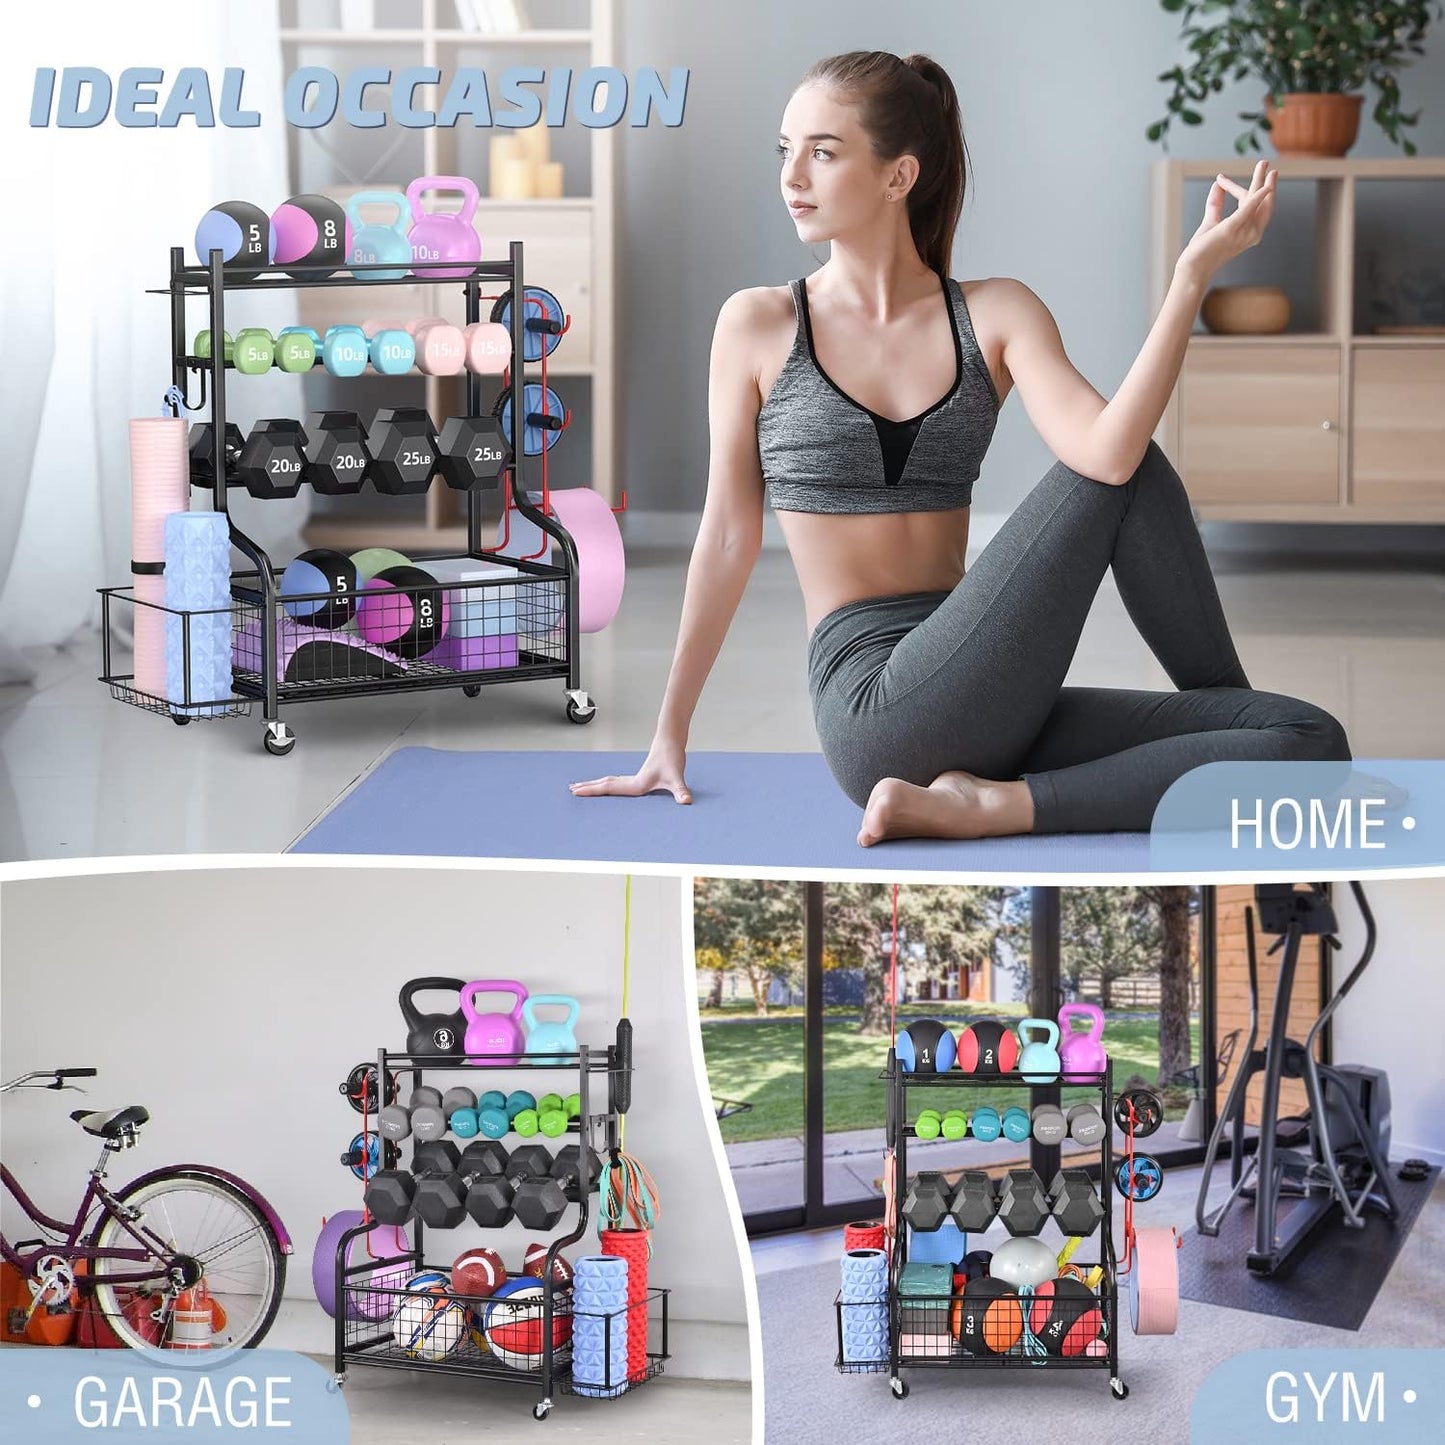 Dumbbell Rack, Weight Rack for Dumbbells, Home Gym Storage for Dumbbells Kettlebells Yoga Mat and Balls, All in One Workout Storage with Wheels and Hooks, Powder Coated Finish Steel